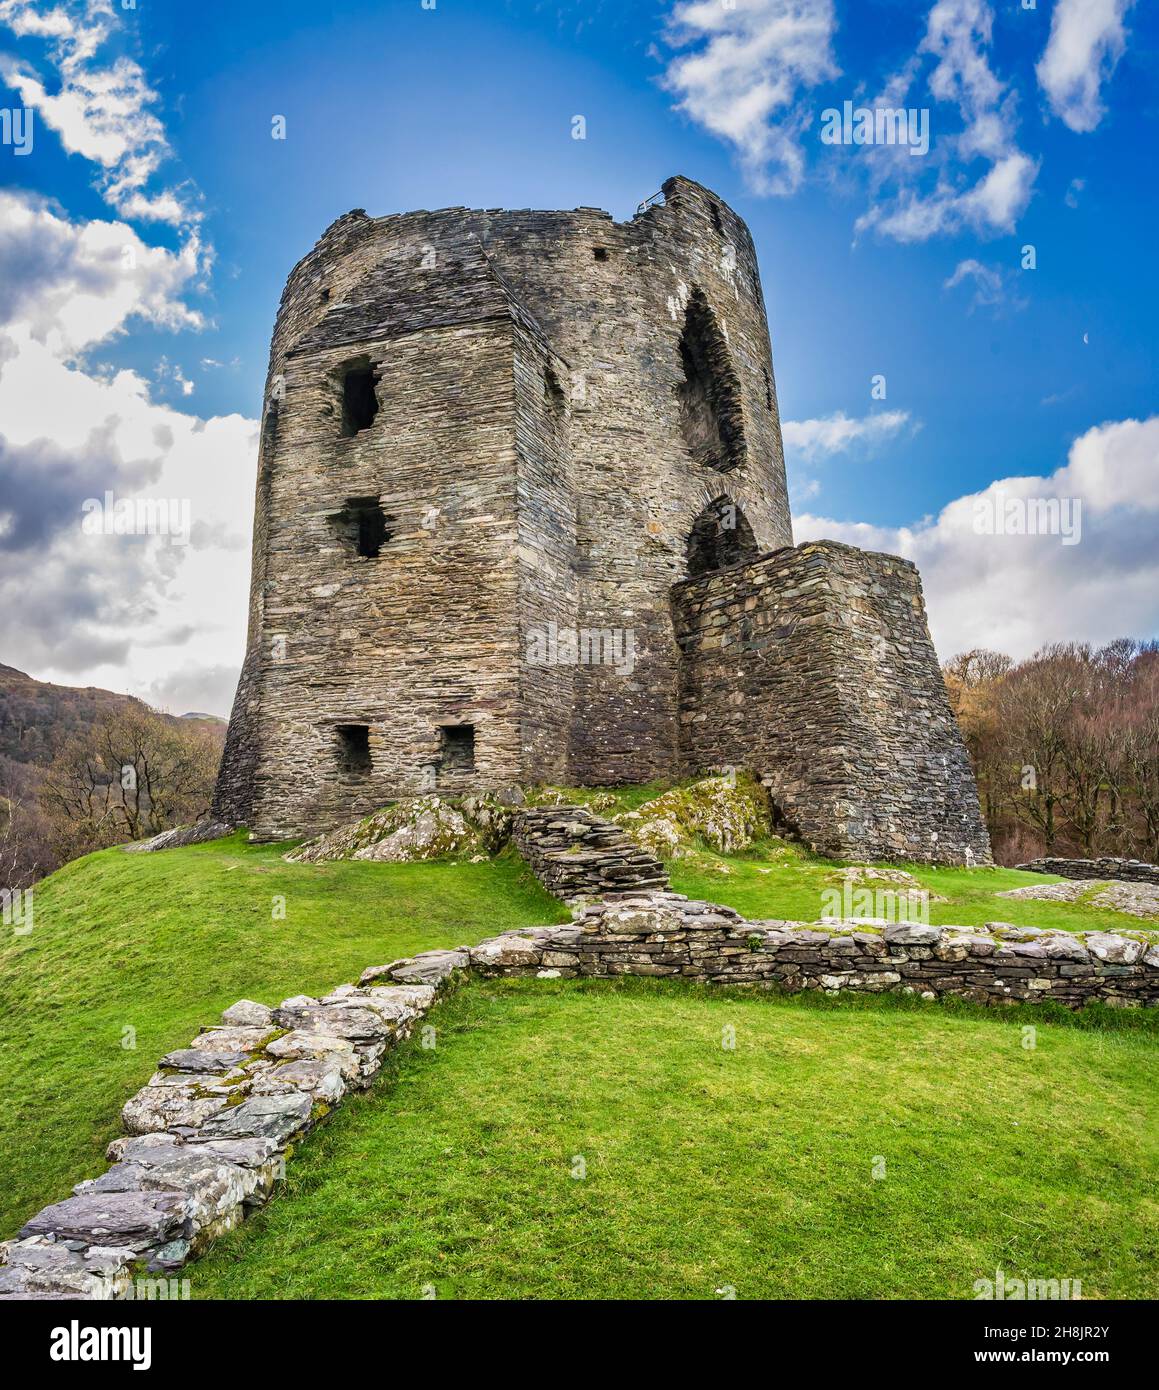 This is the 13th century medieval-round tower fortress of Dolpadarn  Castle built by Llewelyn the Great near the Welsh village of Llanberis Stock Photo